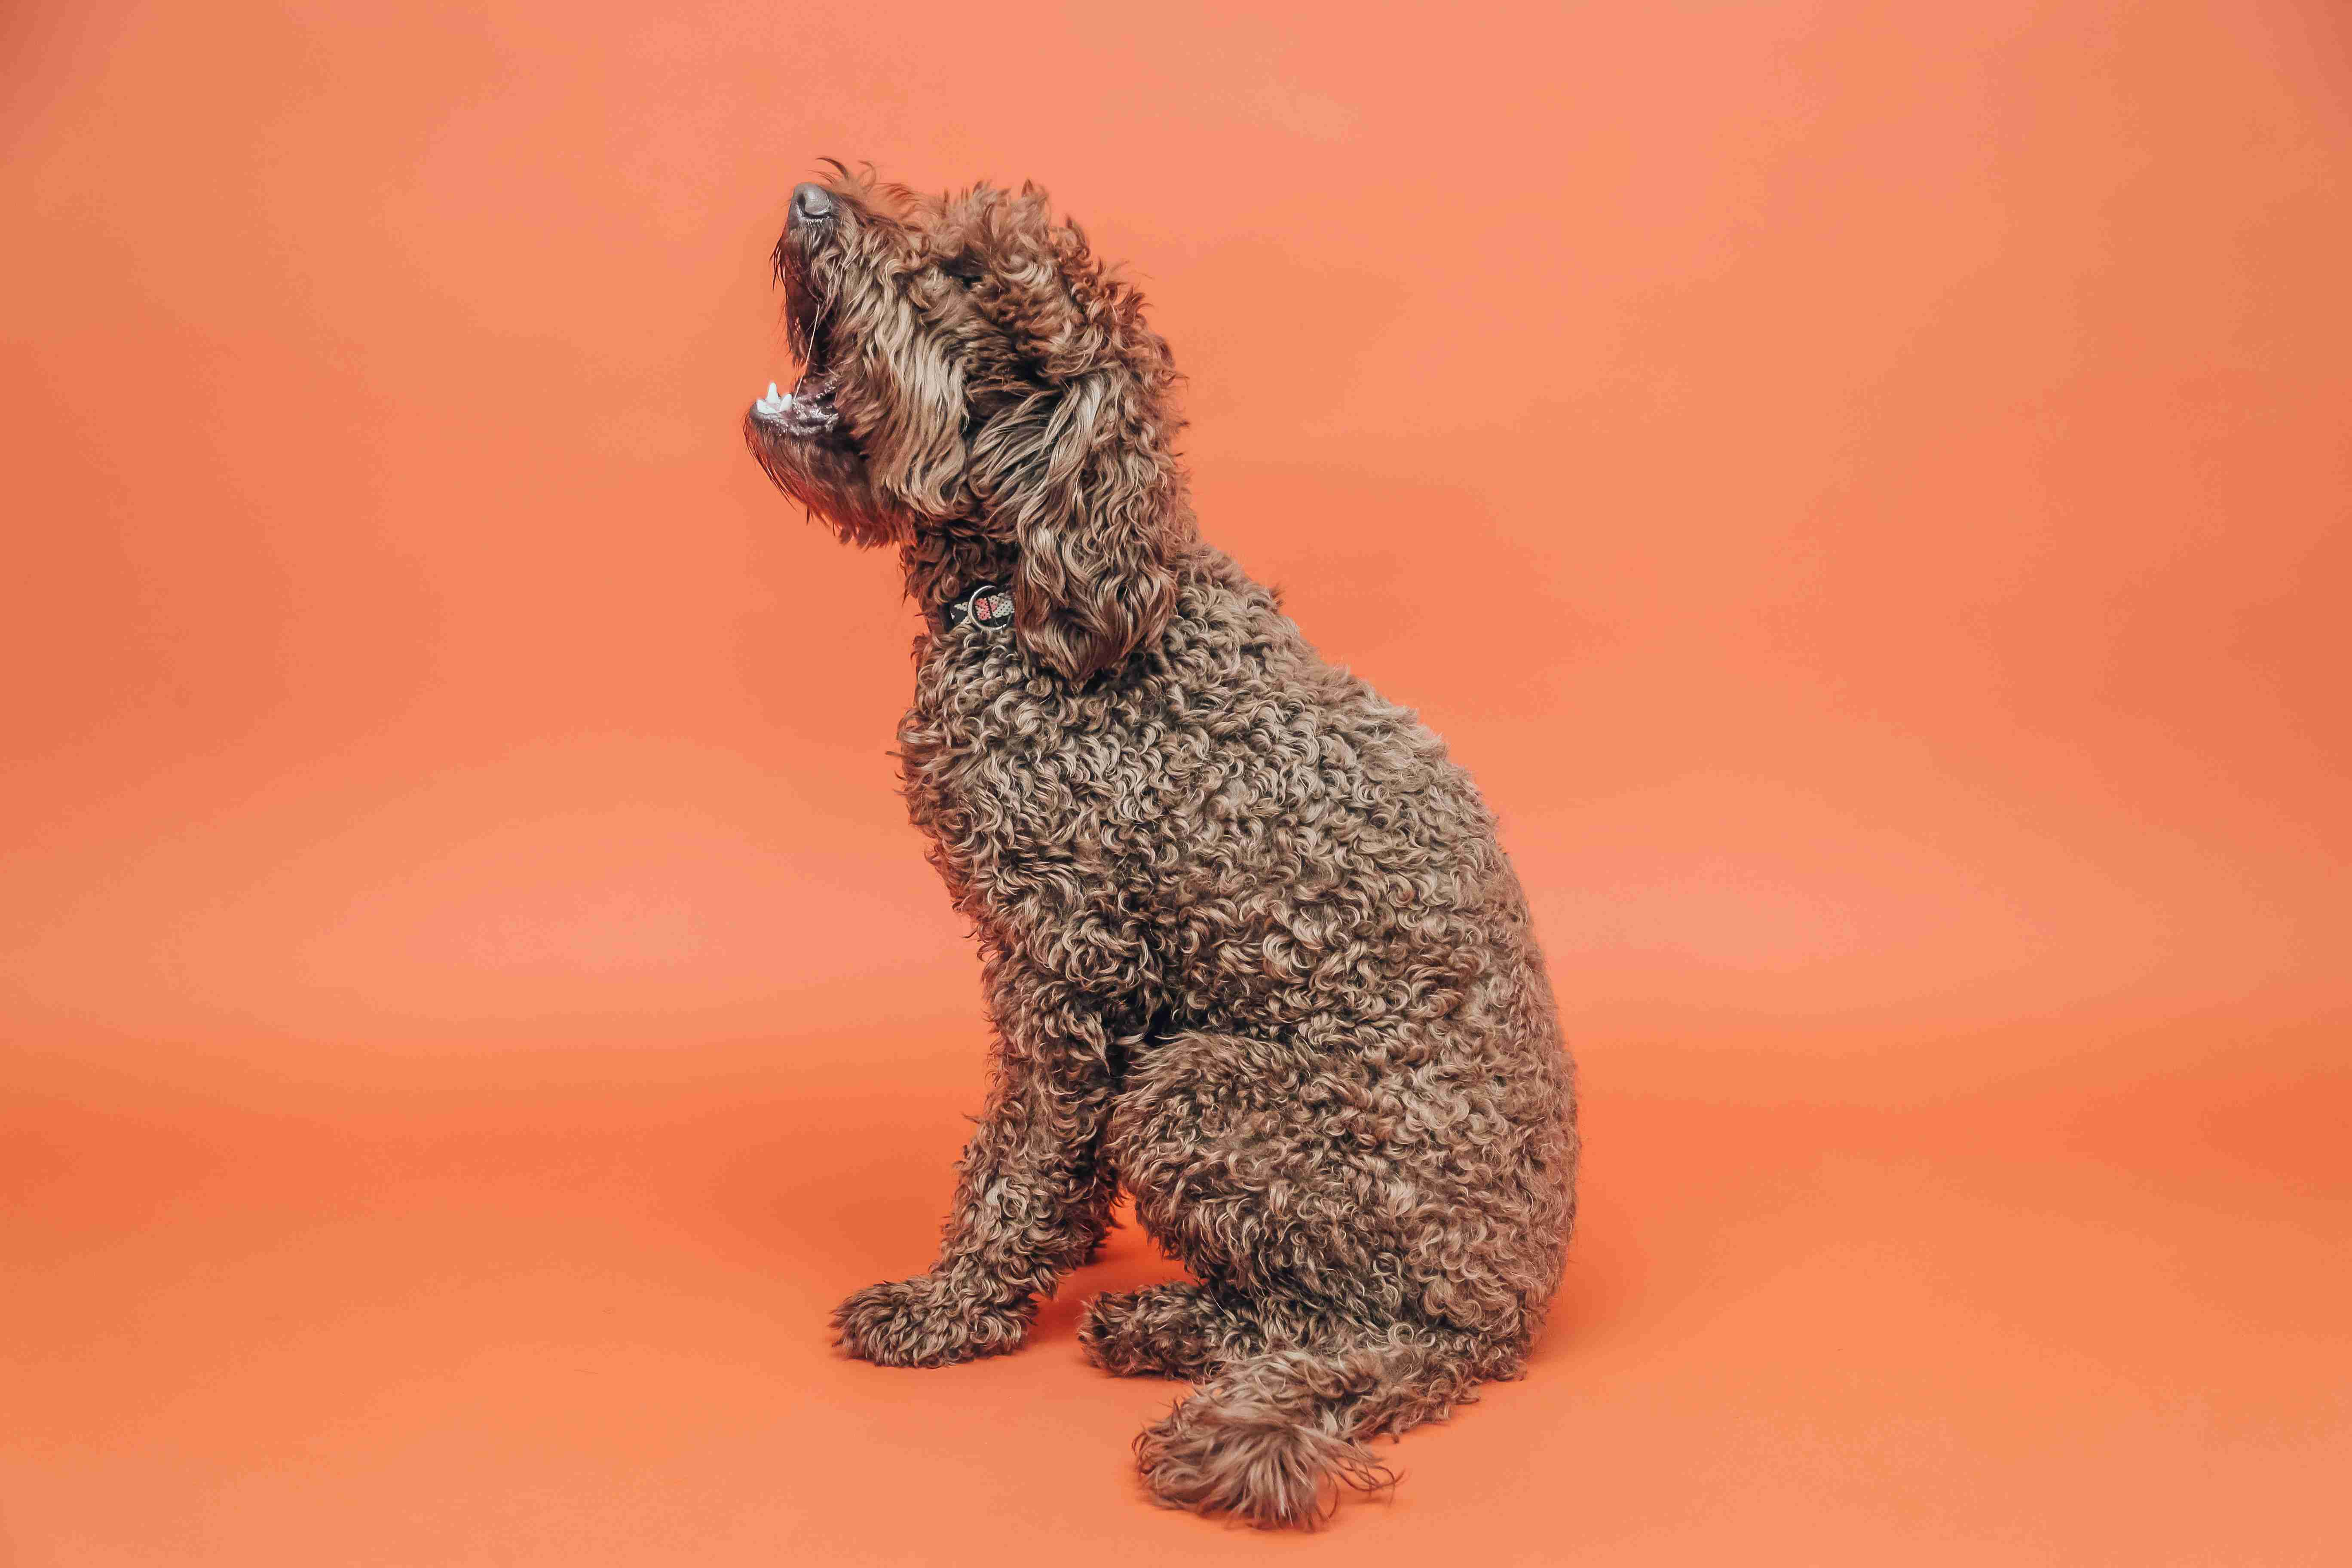 Did you find it challenging to establish boundaries and rules for your Poodle puppy?